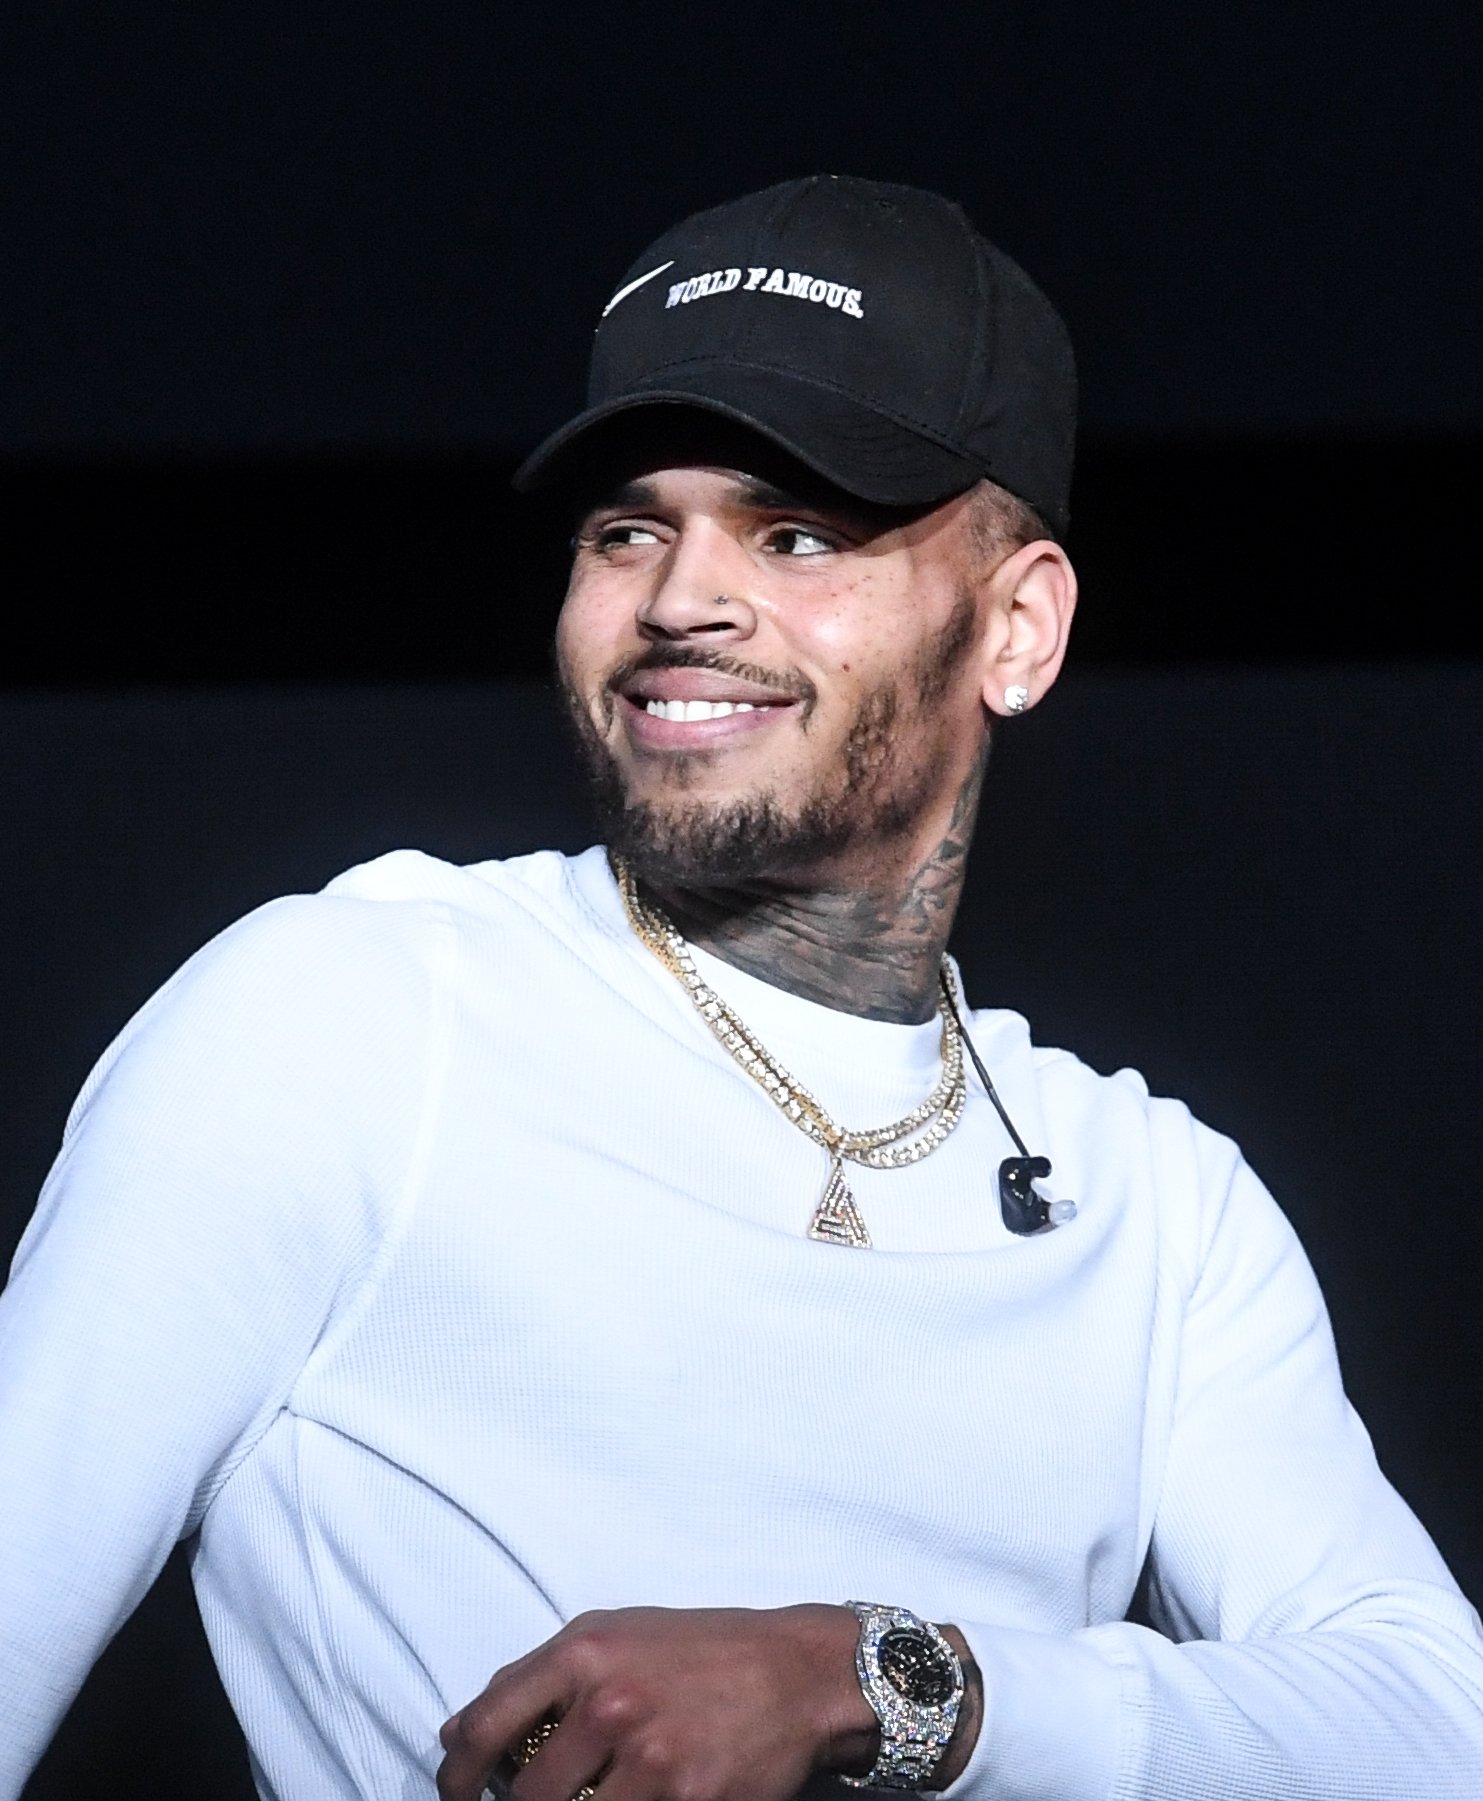 Chris Brown smiles at his audience at a concert in Atlanta in December 2017. | Photo: Getty Images